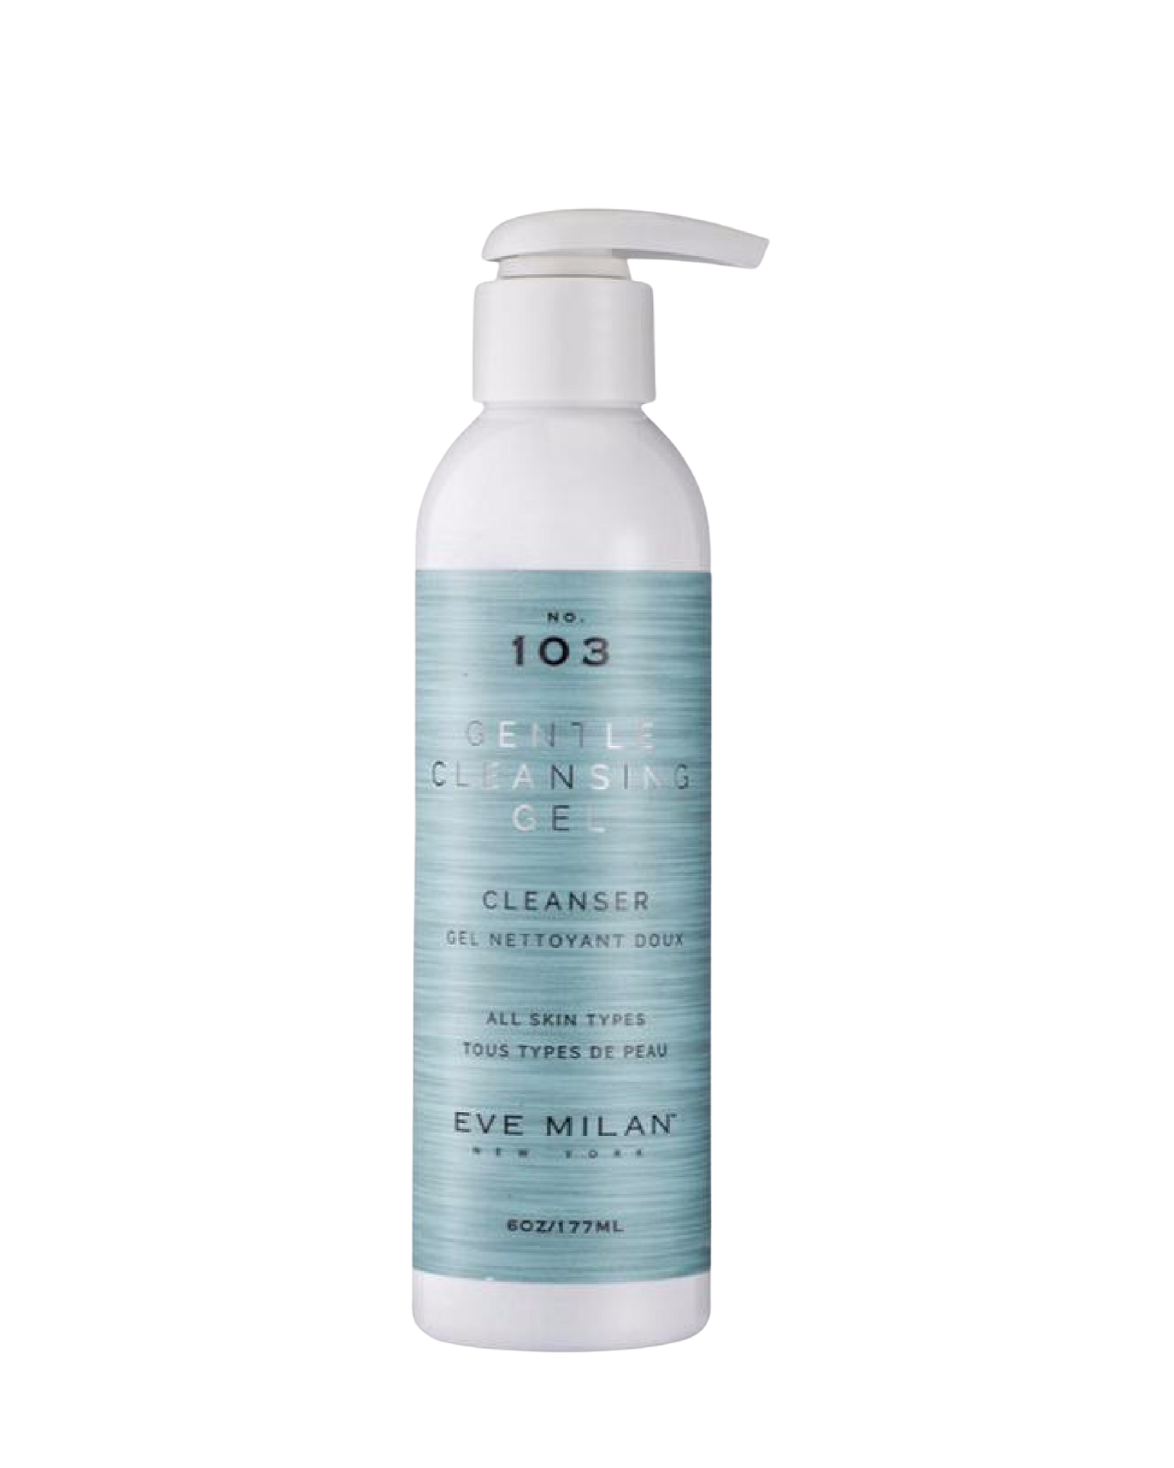 Gentle Face Cleaning Gel No. 103